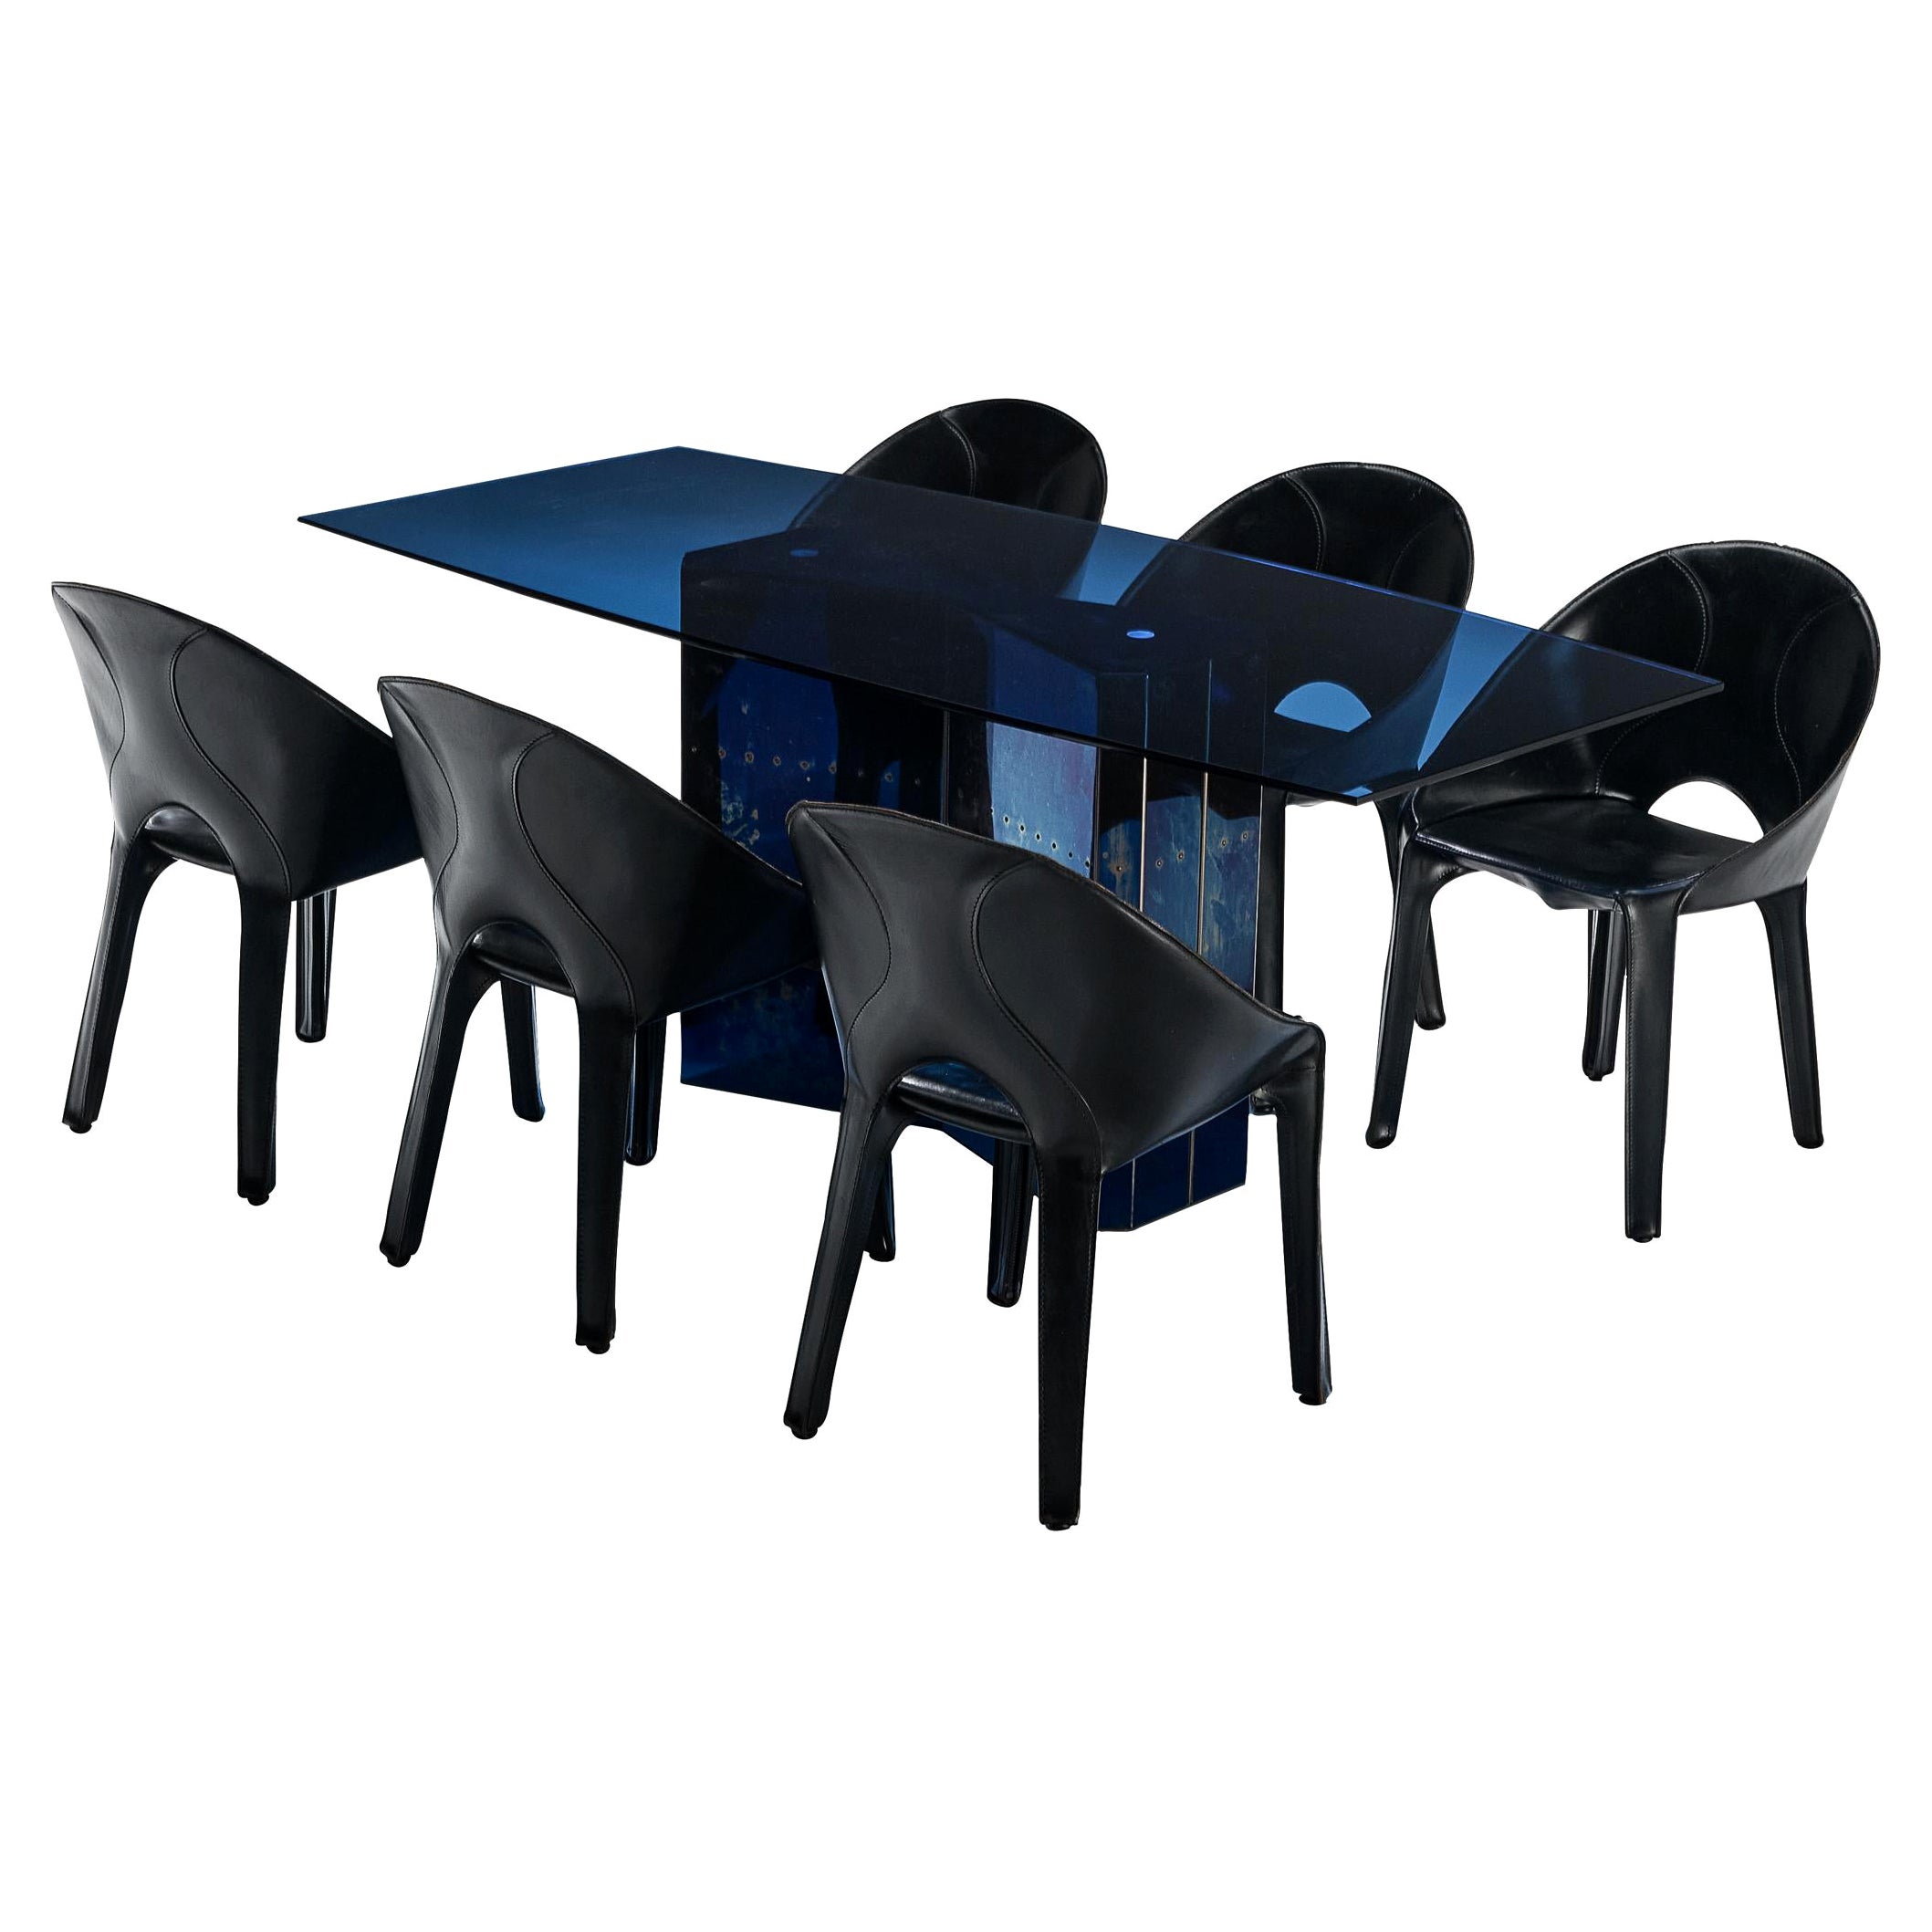 Afra & Tobia Scarpa 'Polygonon' Dining Table & Mario Bellini Dining Chairs 